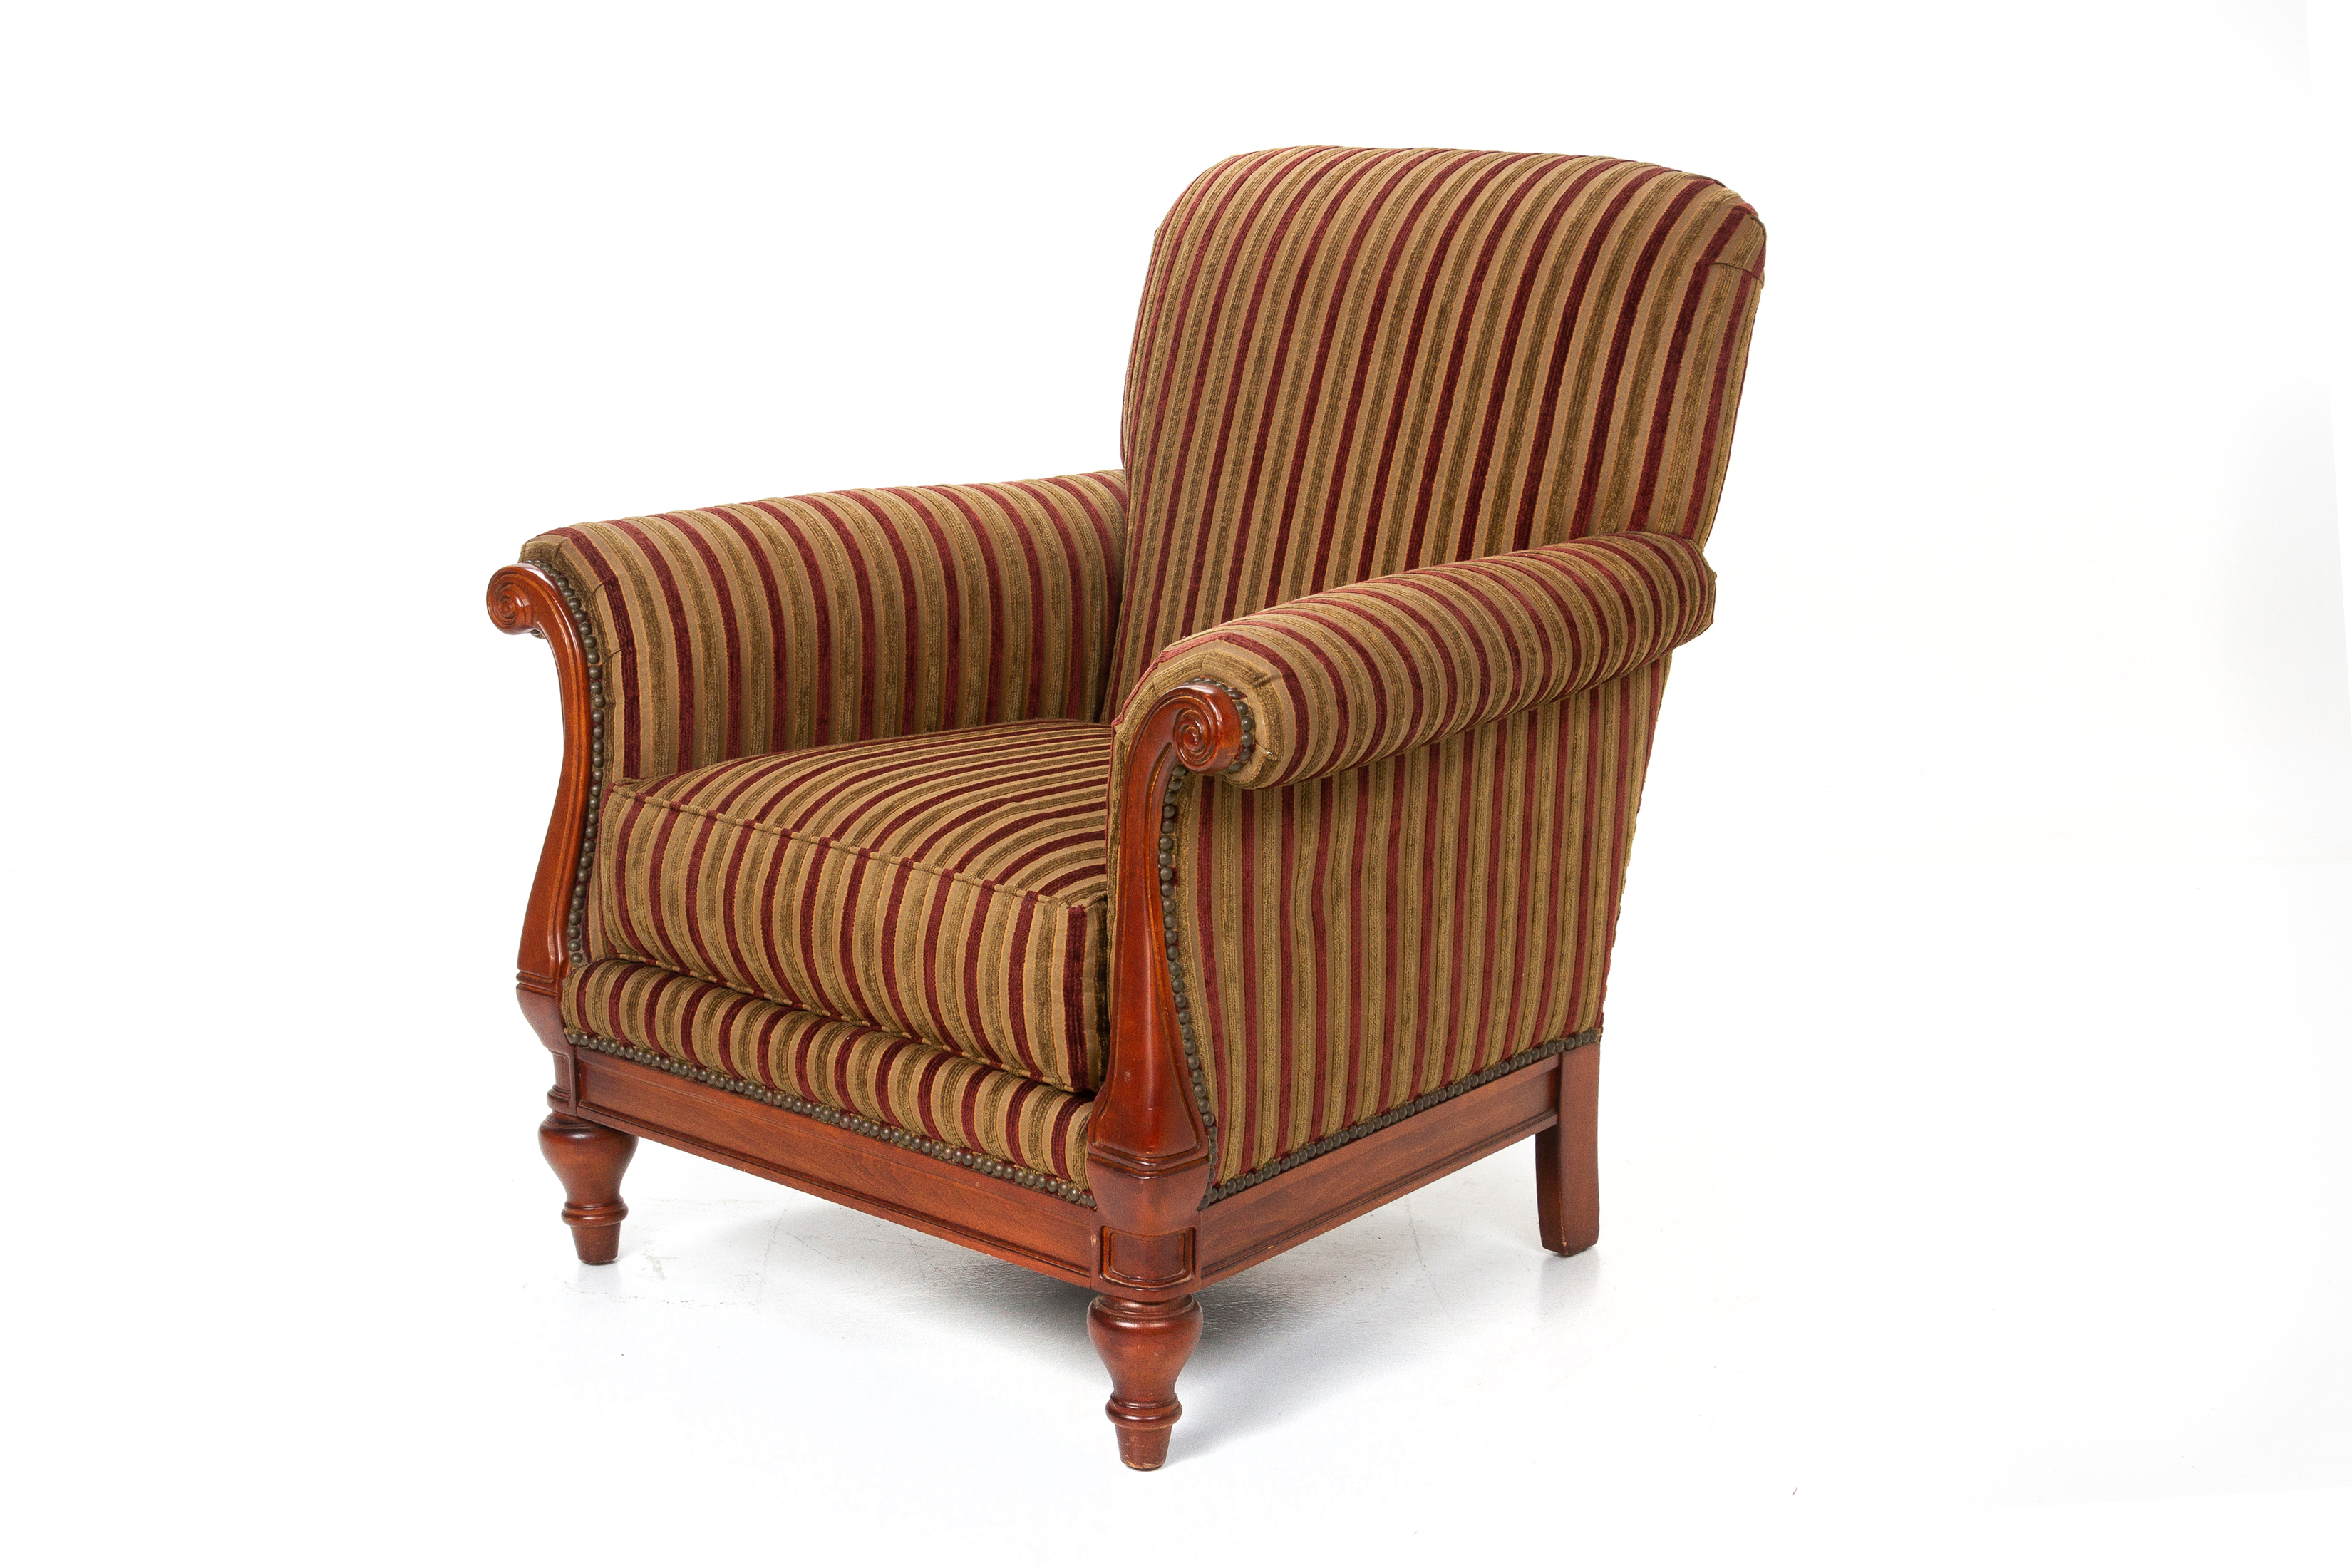 A SMALL UPHOLSTERED ARMCHAIR